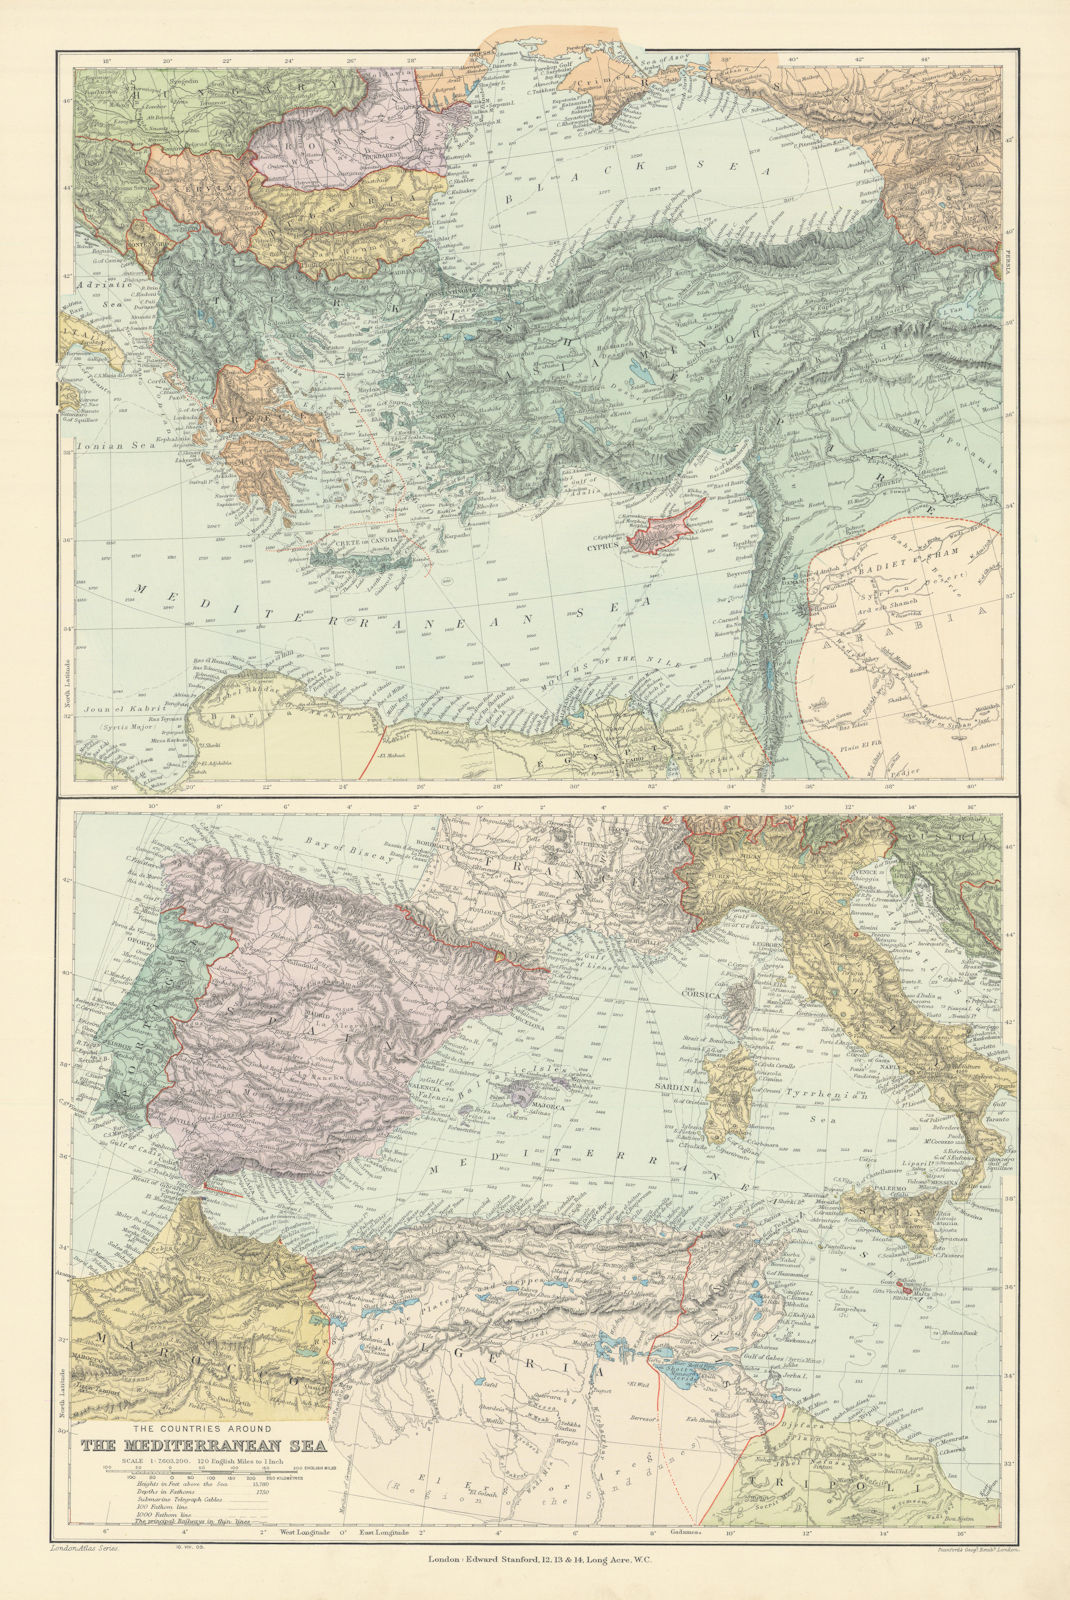 Countries round the Mediterranean. Soundings Telegraph cables. STANFORD 1904 map